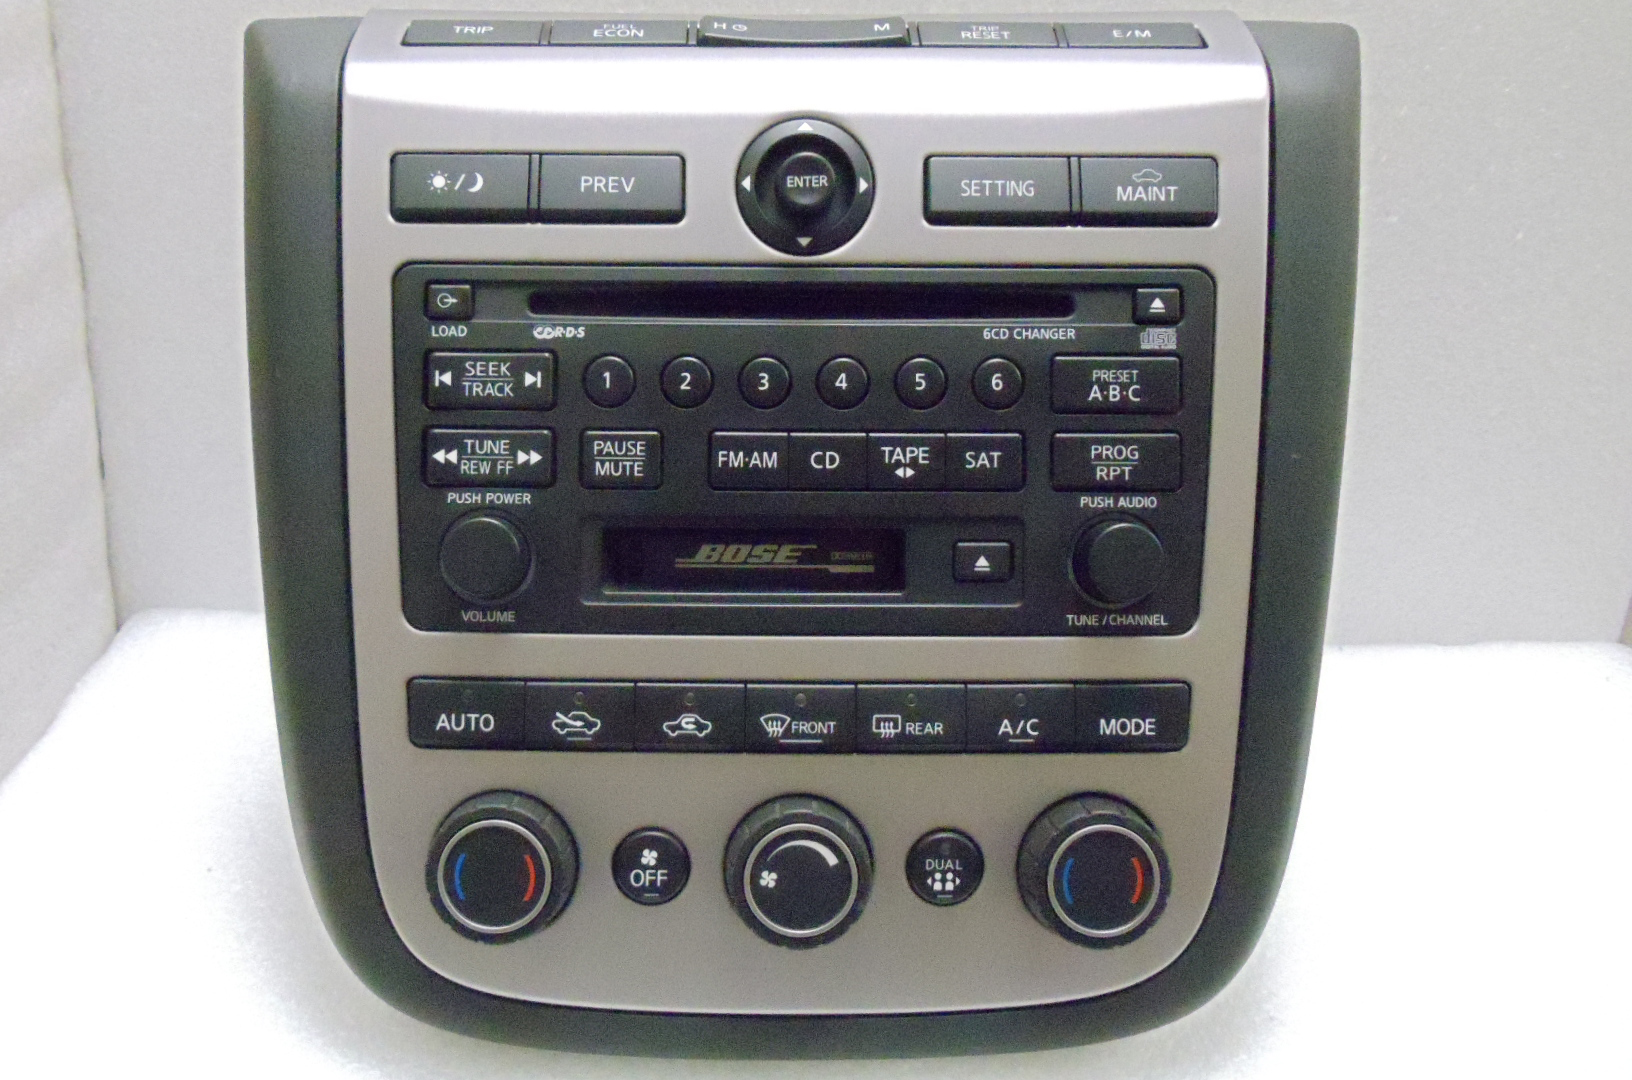 Nissan murano bose stereo problems #1